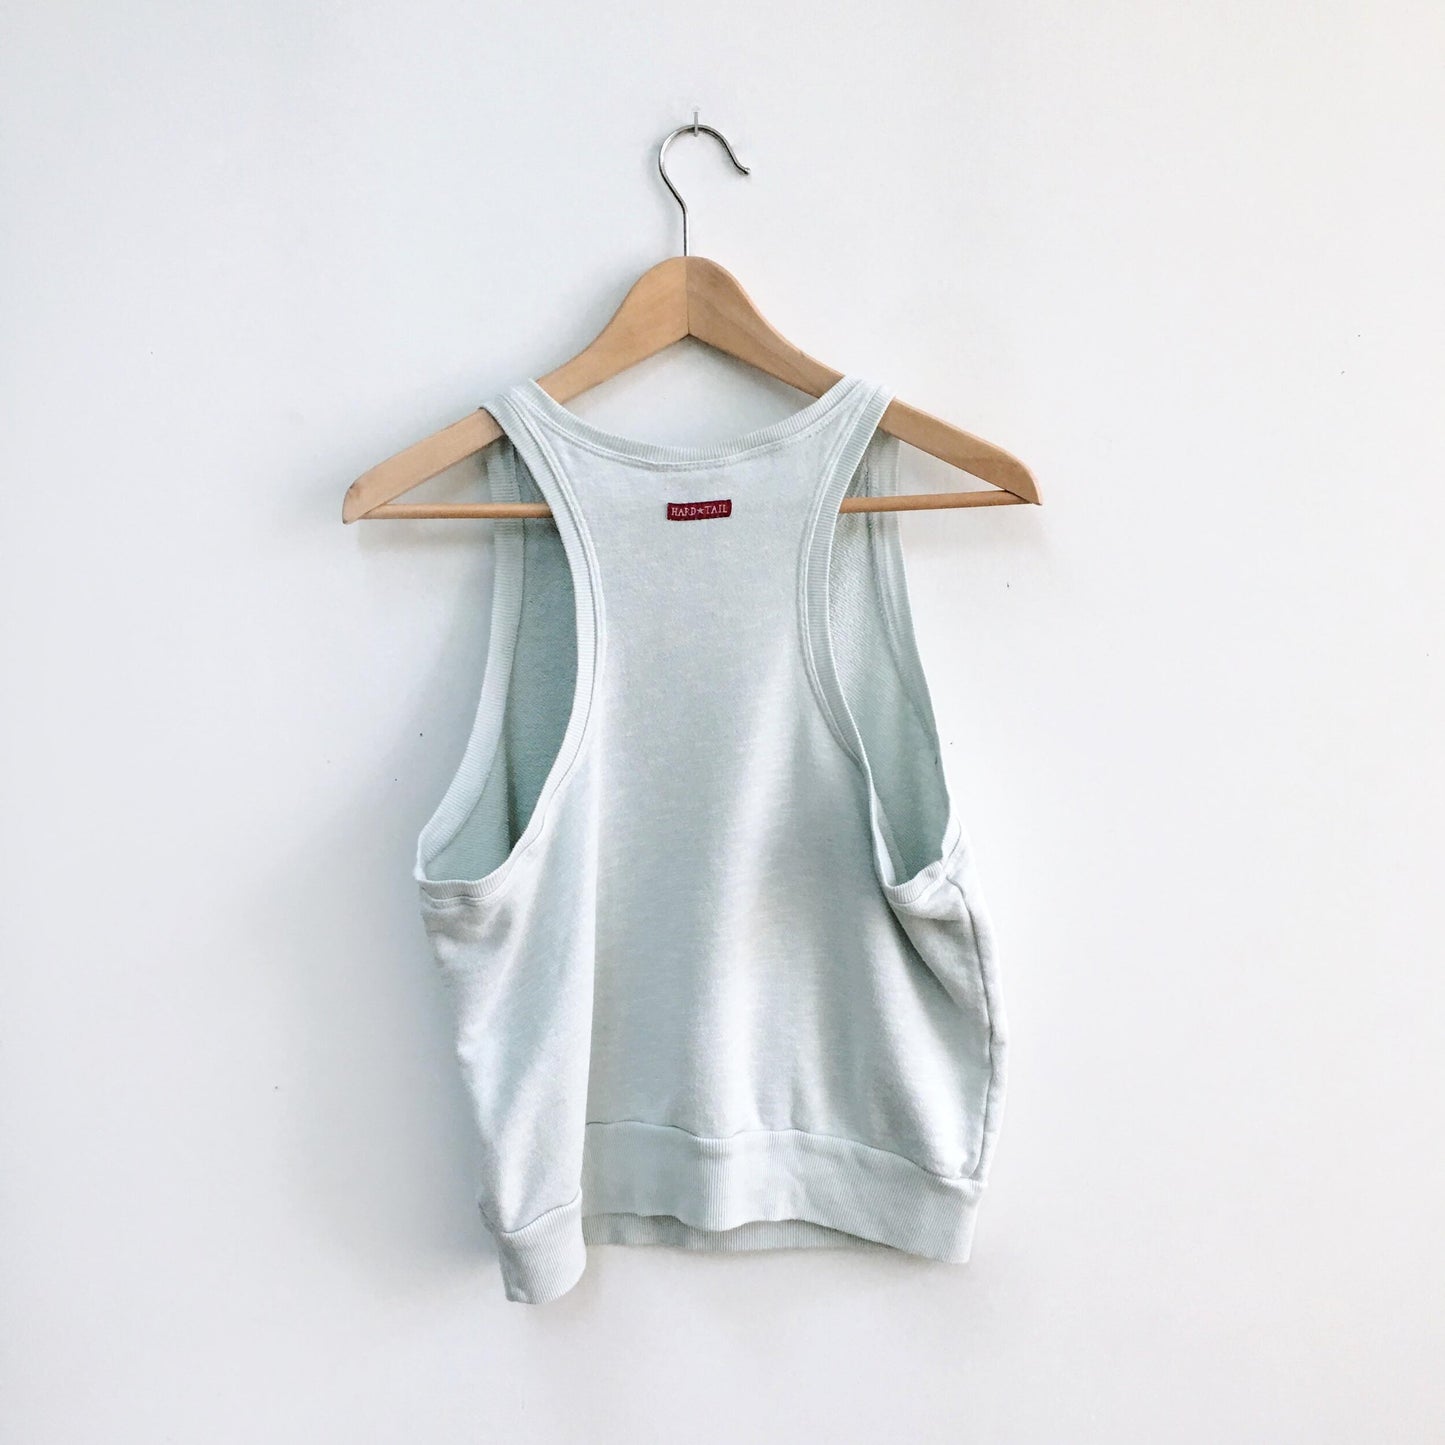 Hard Tail Forever sweatshirt tank - size Small